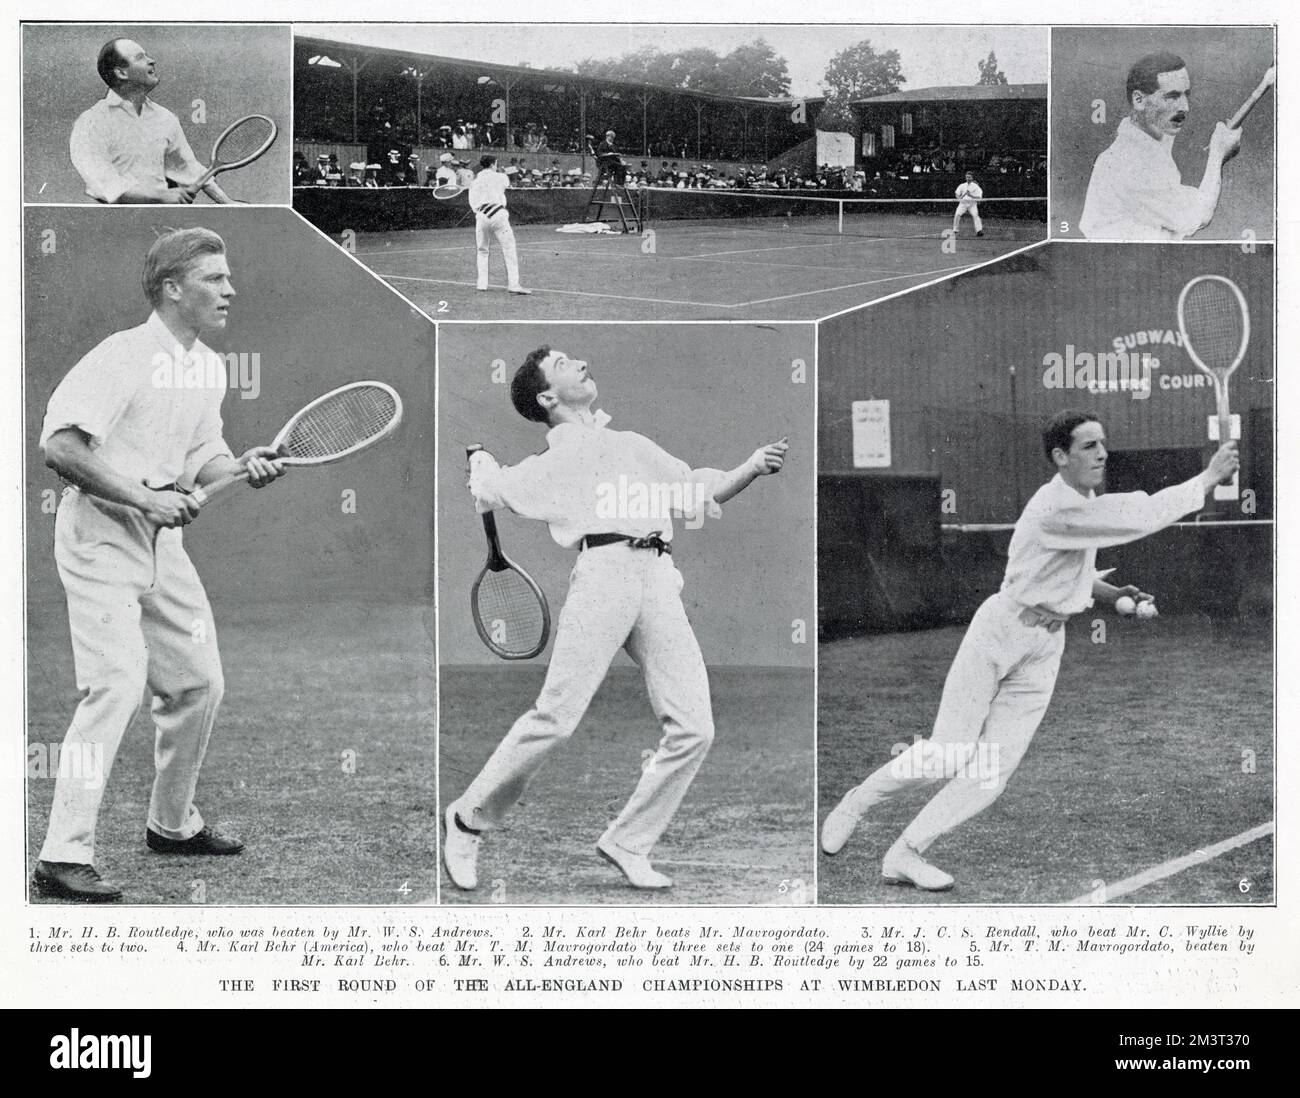 The First Round of the All England Championships at Wimbledon. (from top left): 1. Mr H Routledge 2, Karl Behr beats Theodore Michel Mavrogordato 3. J C S Rendall 4. Karl Behr (who survived of the sinking of the RMS Titanic) 5. Theodore Michel Mavrogordato 6. W S Andrews Stock Photo